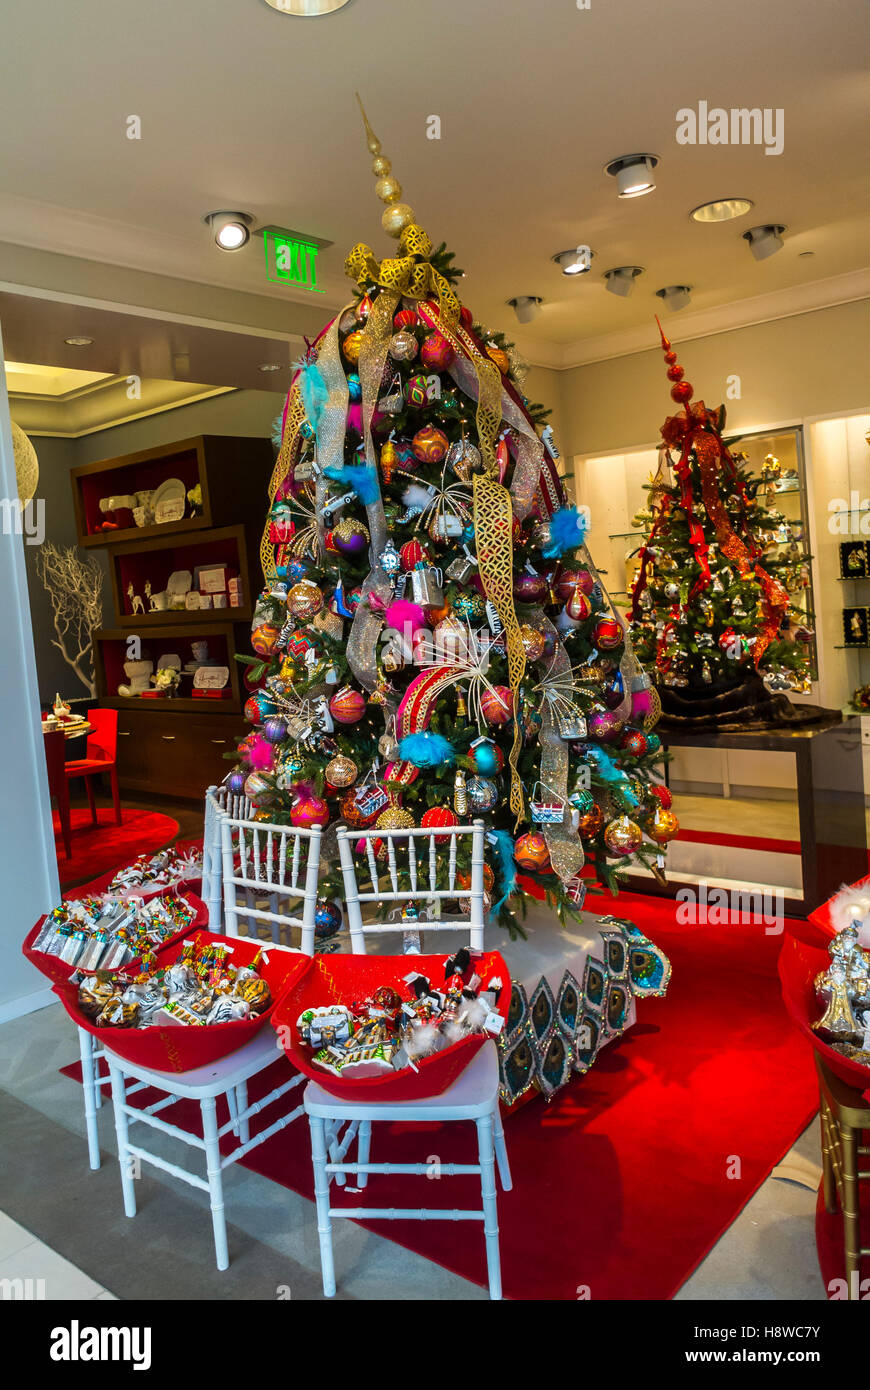 San Francisco, CA, USA, Holiday Decorations, on Display inside Luxury American Department Store, Neiman Marcus, Christmas Tree Stock Photo